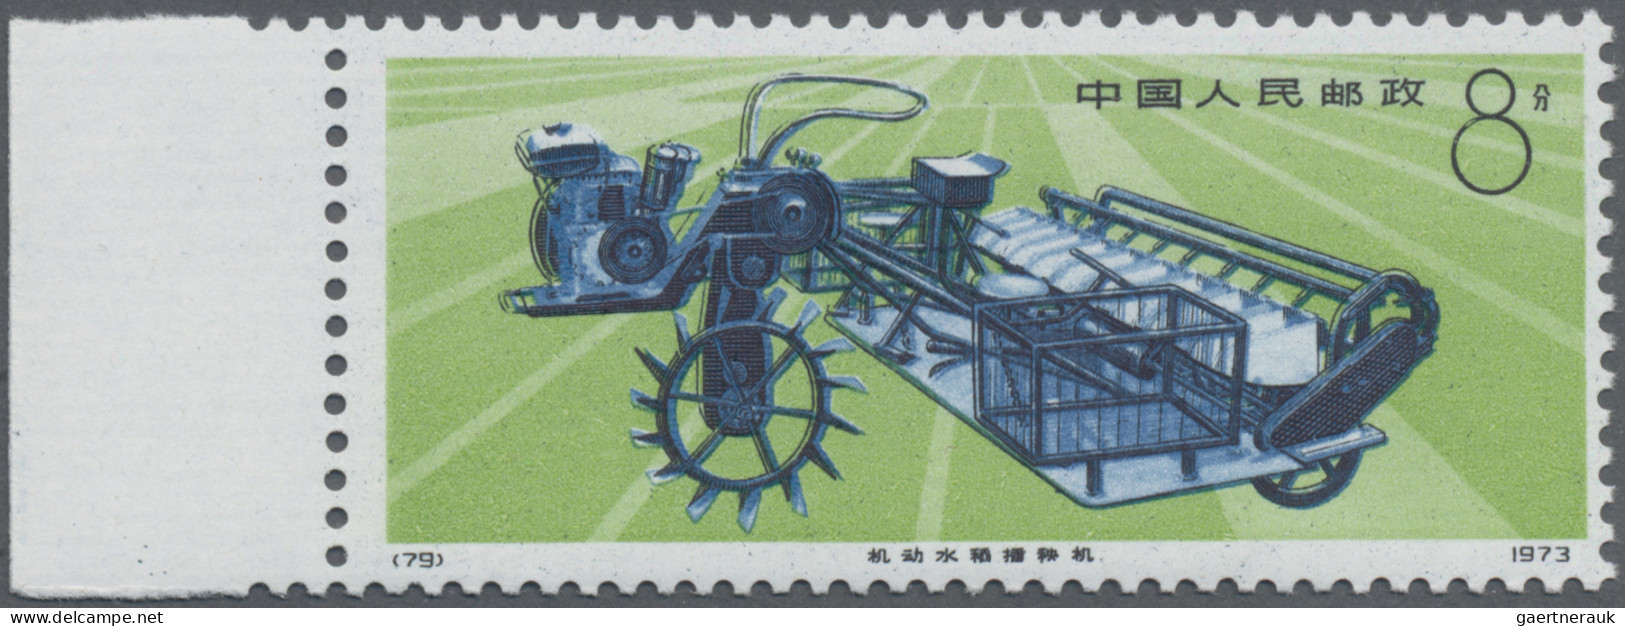 China (PRC): 1974, Machine Construction Set (N78-81),MNH, With Margin, Stamp B1 - Unused Stamps